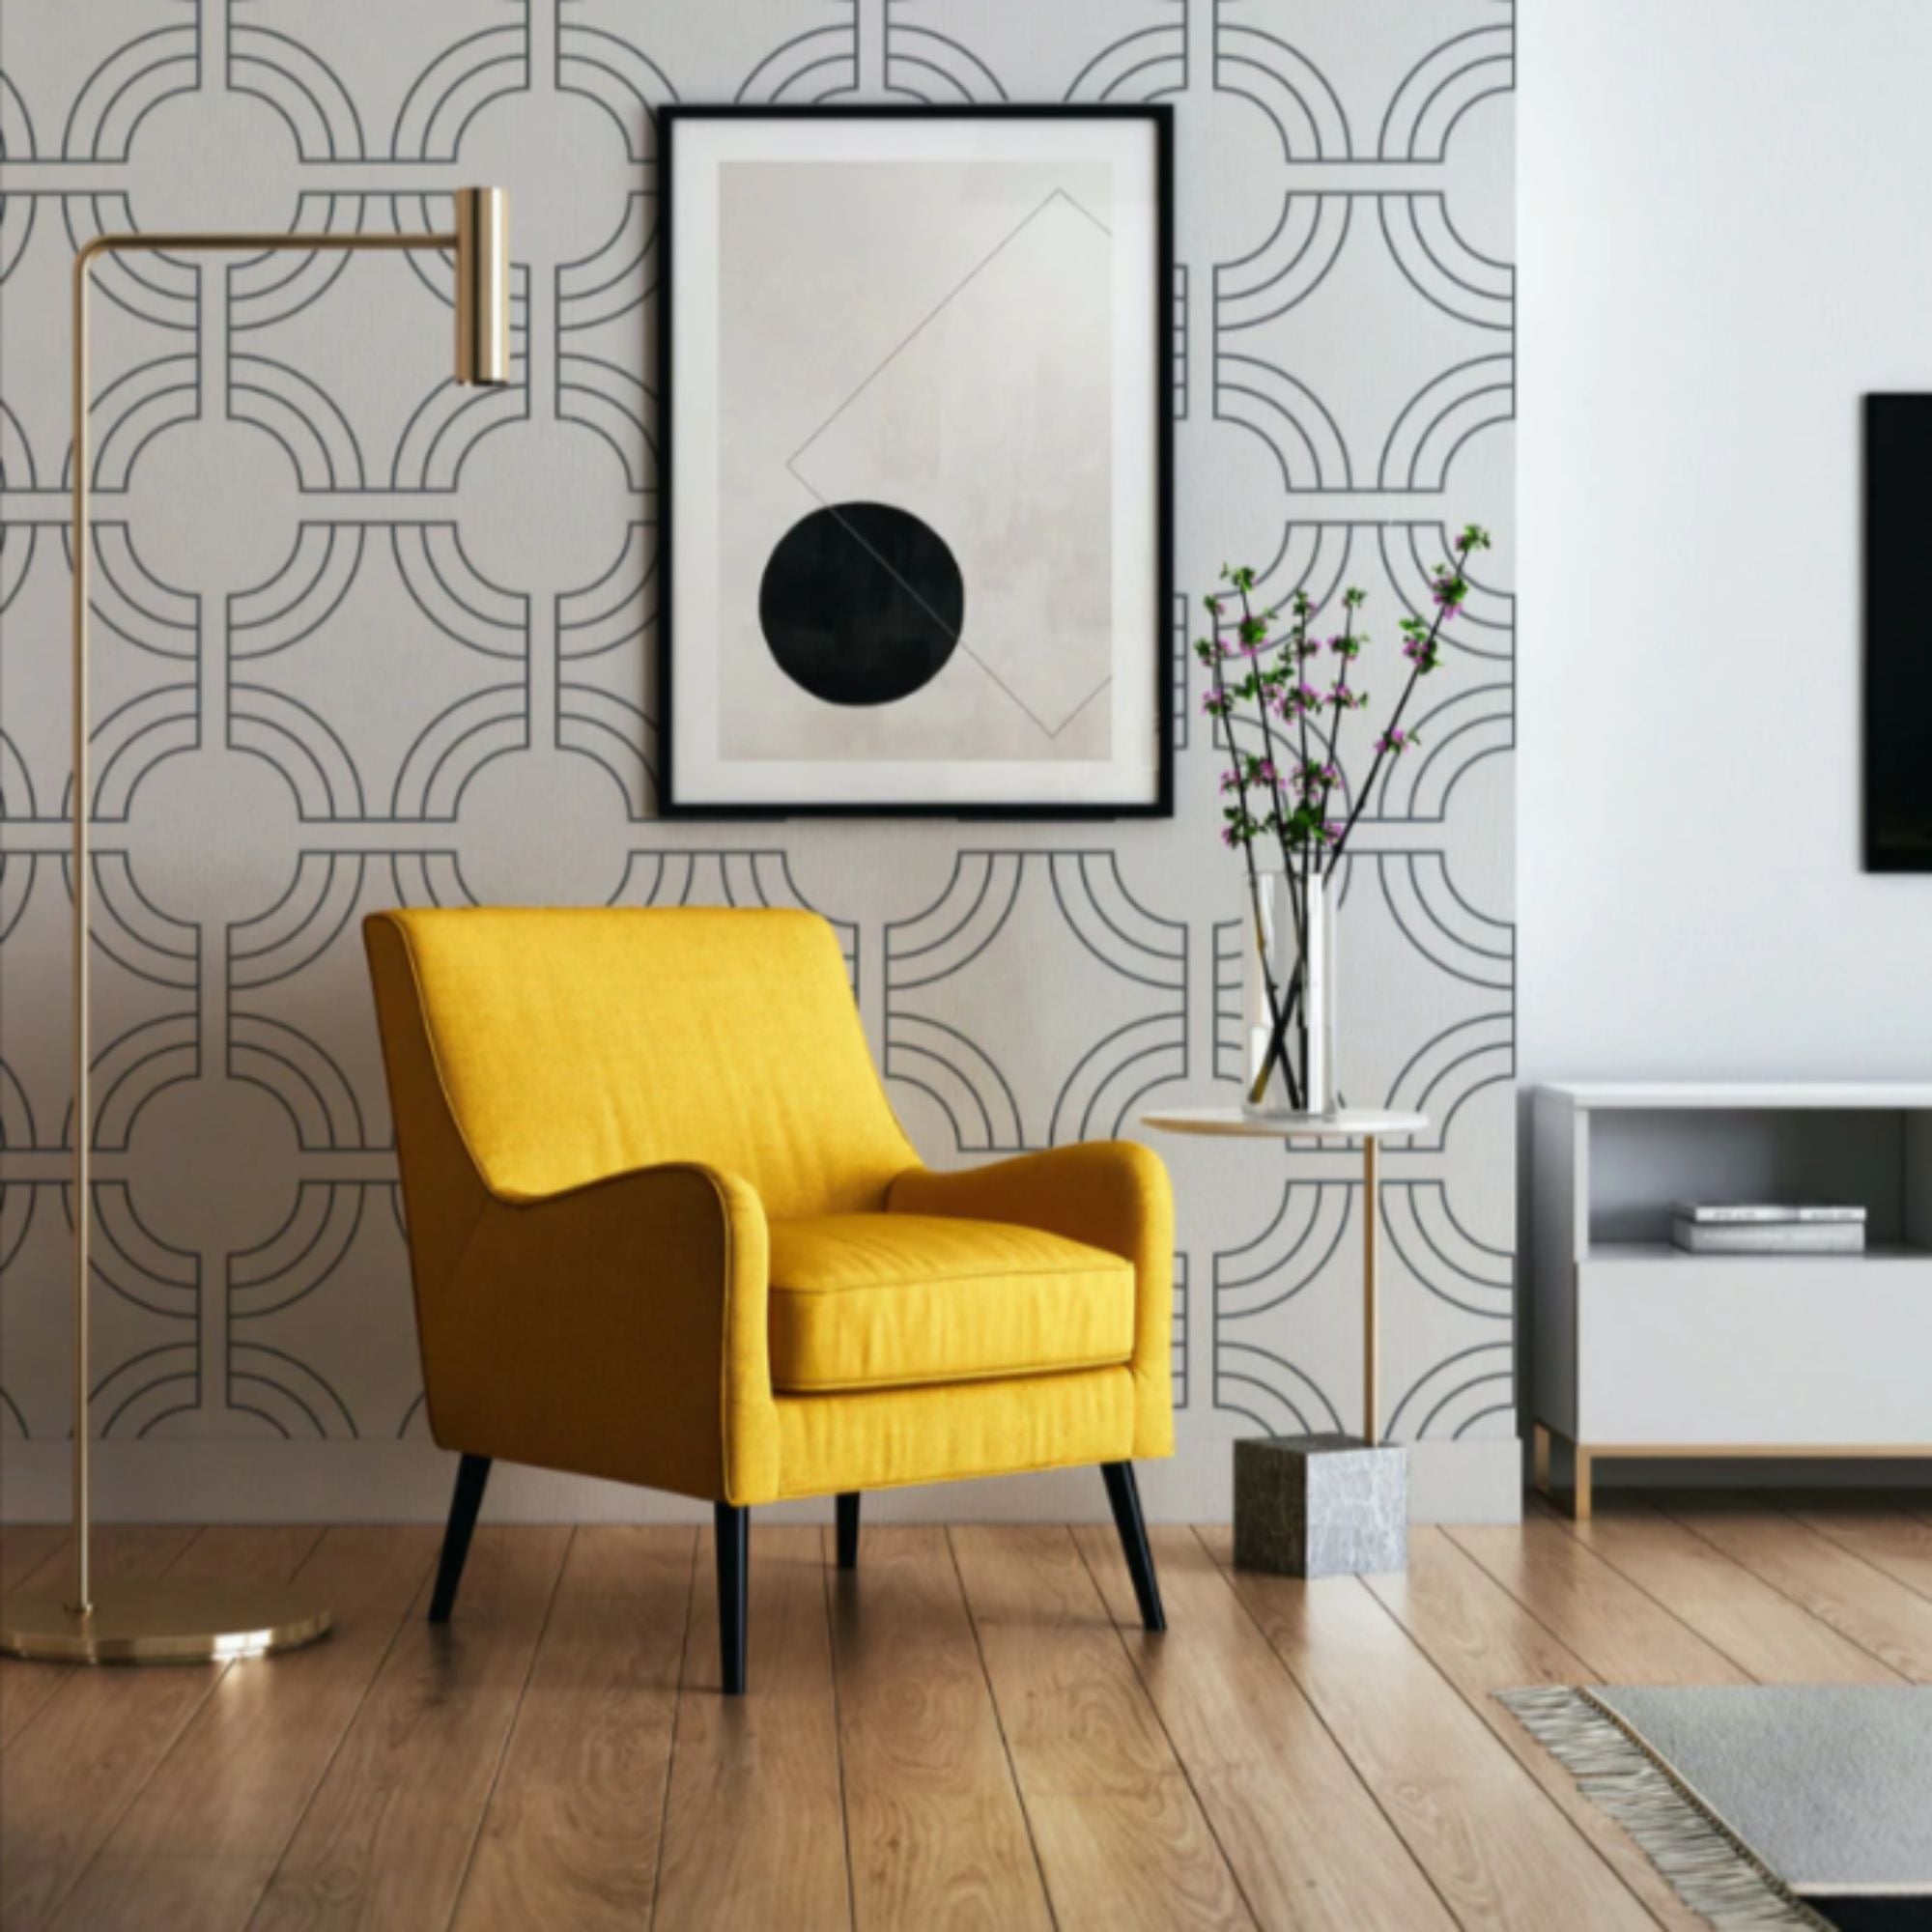 A bright room is adorned with the Geometric Wallpaper, providing an elegant and dynamic backdrop for a mustard yellow armchair. The wallpaper's strong lines and curves form a striking contrast with the vibrant furniture and minimalist decor, illustrating a perfect blend of form and color.